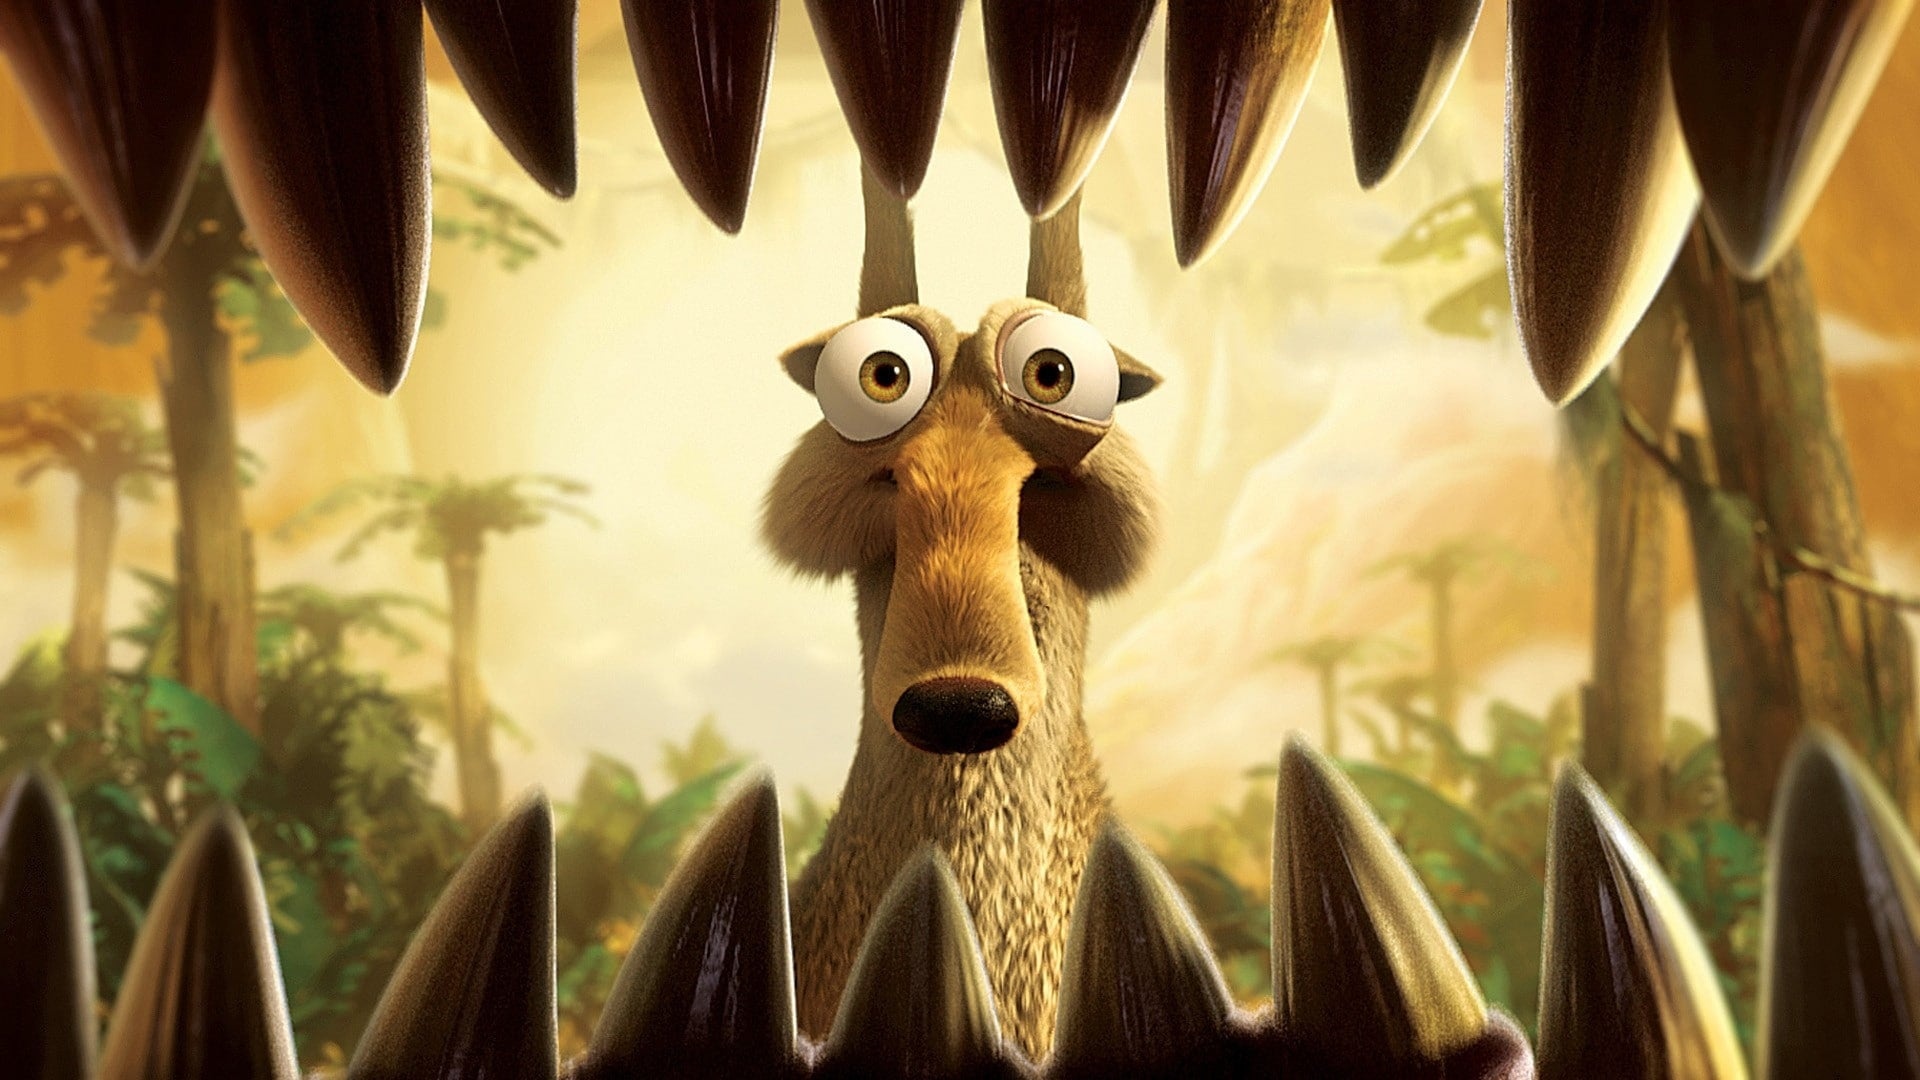 Ice Age: Dawn of the Dinosaurs, Prehistoric backdrops, The Lost World, 1920x1080 Full HD Desktop